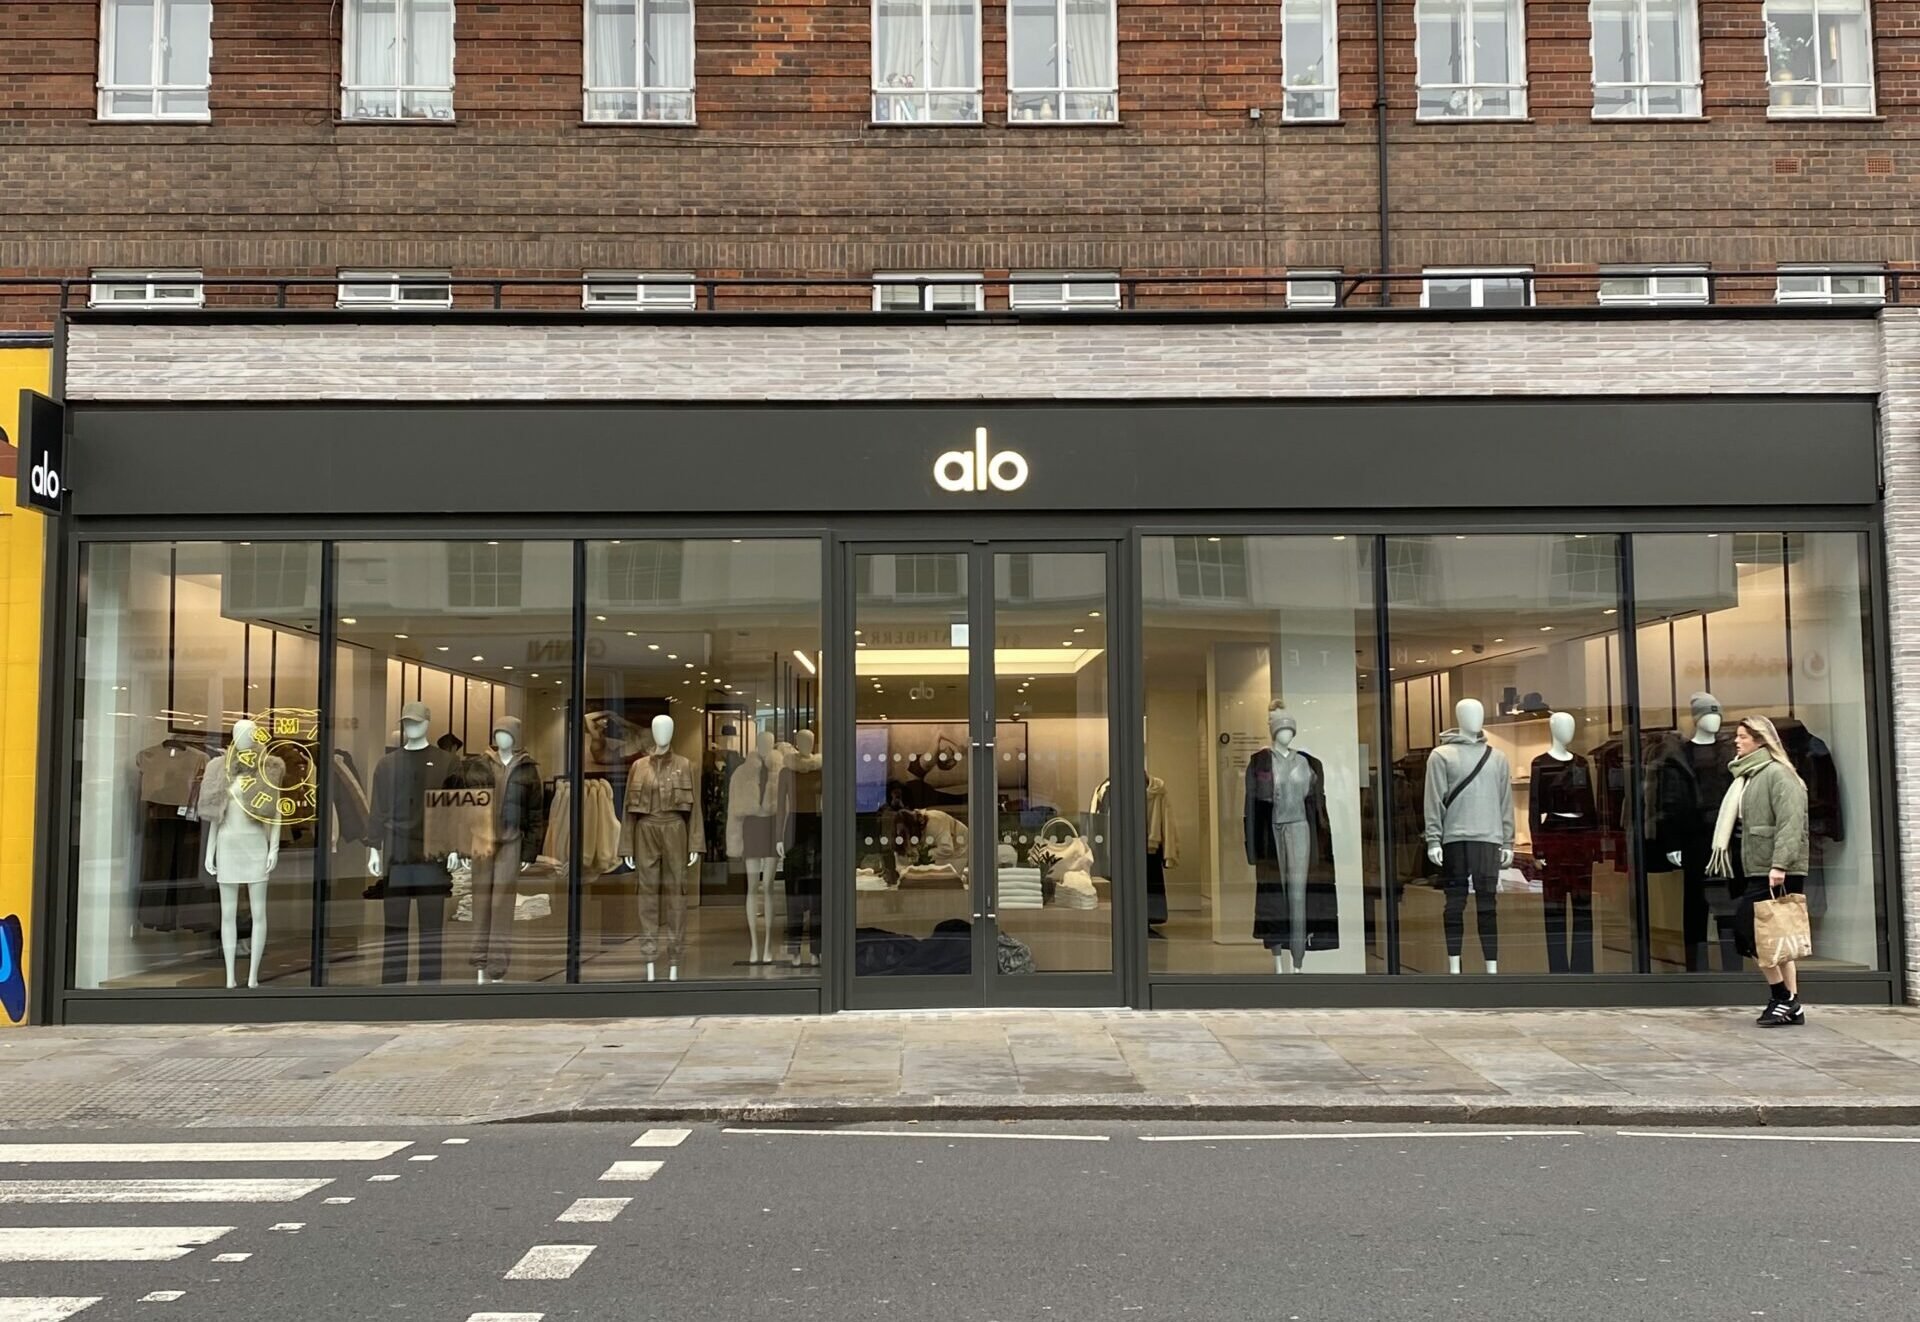 Alo Expands Presence with Opening of 8 New Stores in November!